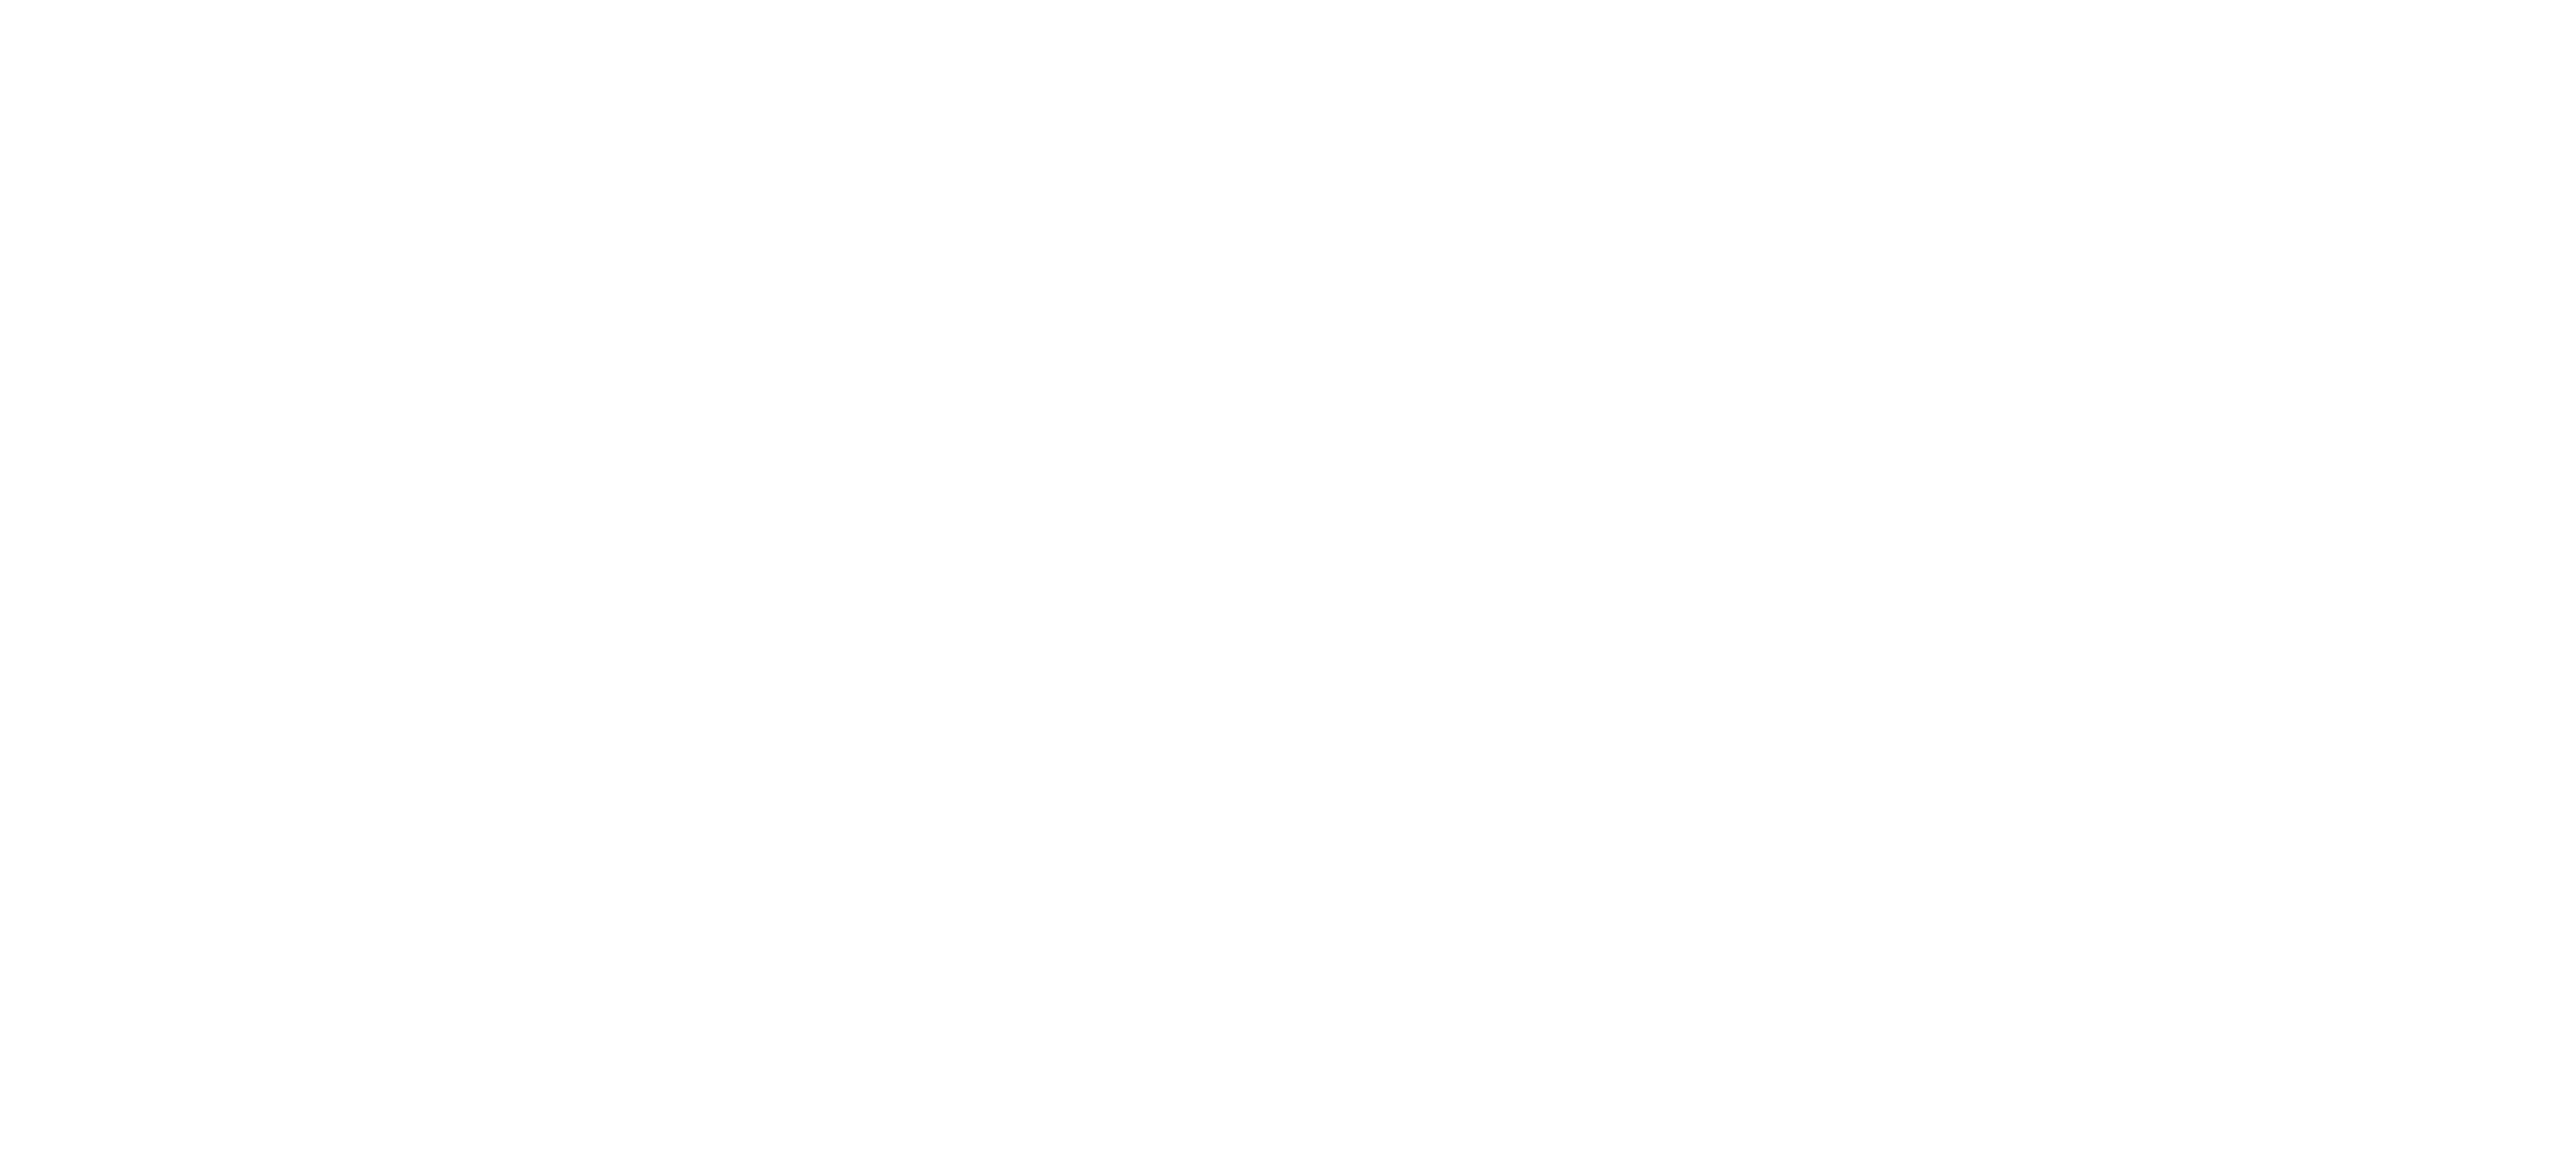 Welcome to Oxfordshire Scouting